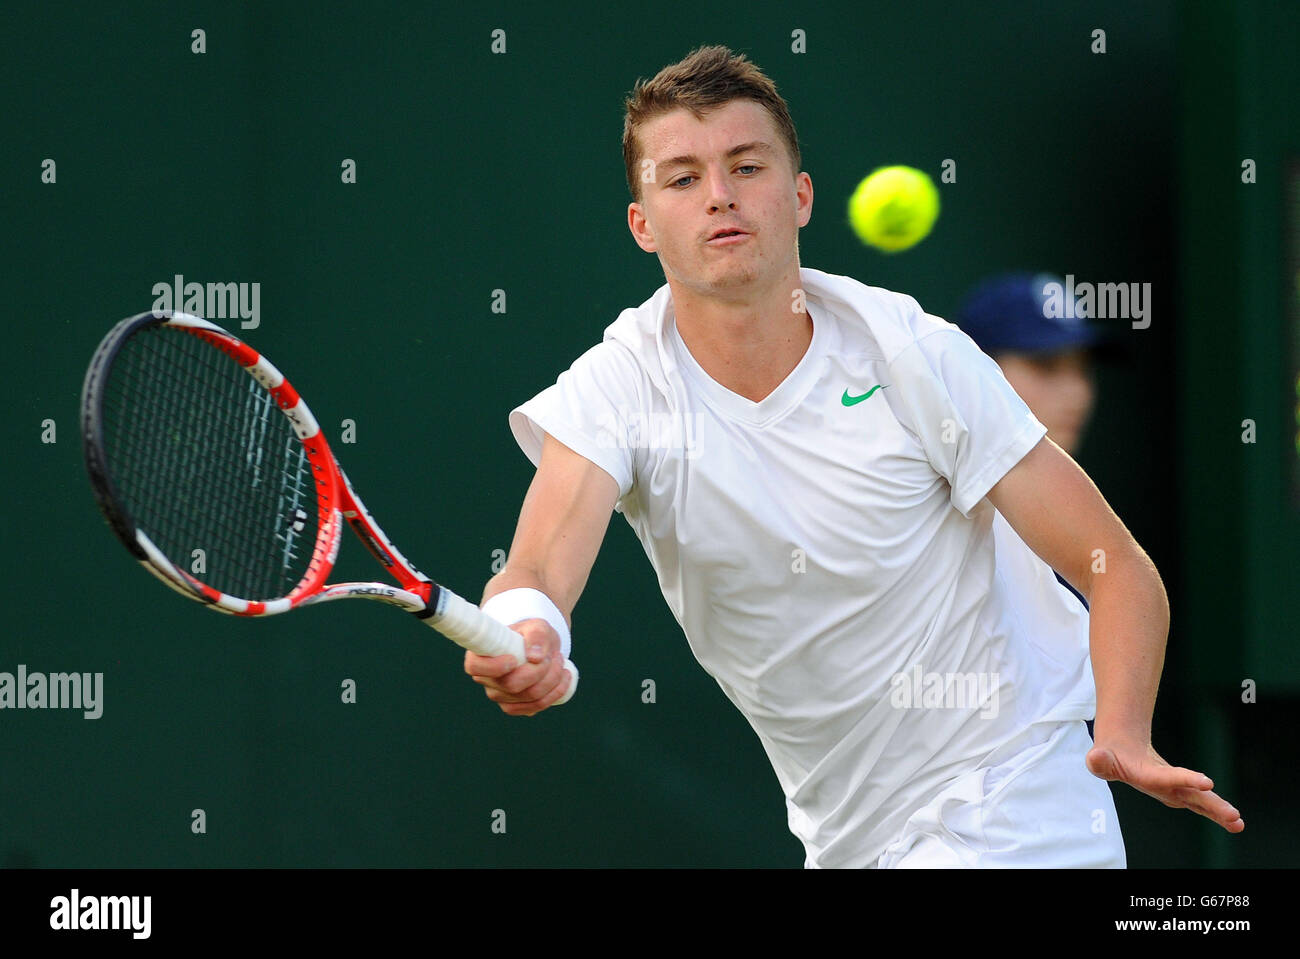 Great Britain's Jonny O'Mara in action against France's Maxime Janvier in his Boy's Singles match during day seven of the Wimbledon Championships at The All England Lawn Tennis and Croquet Club, Wimbledon. Stock Photo